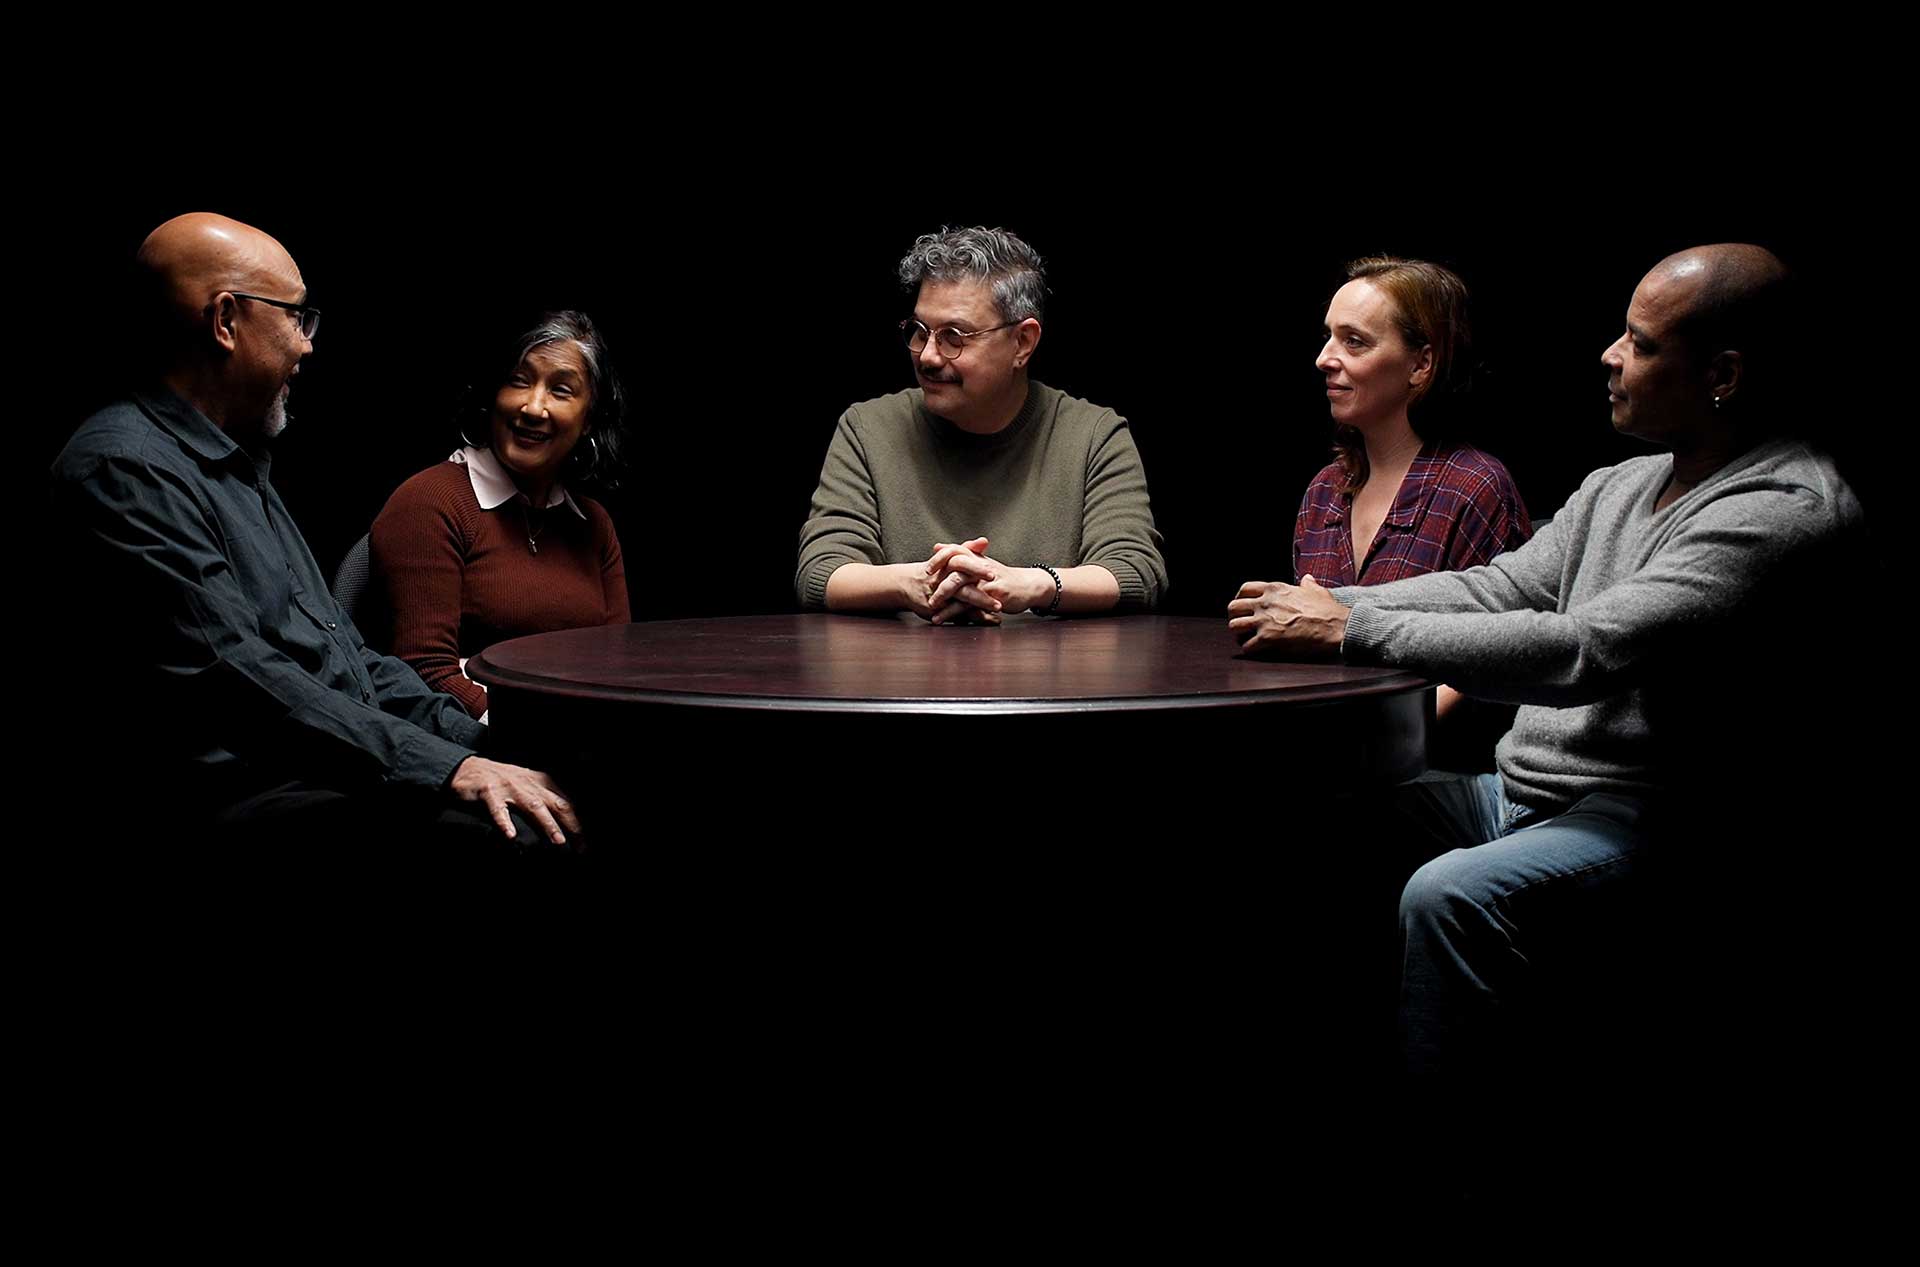 Five people sitting around a table having a discussion.